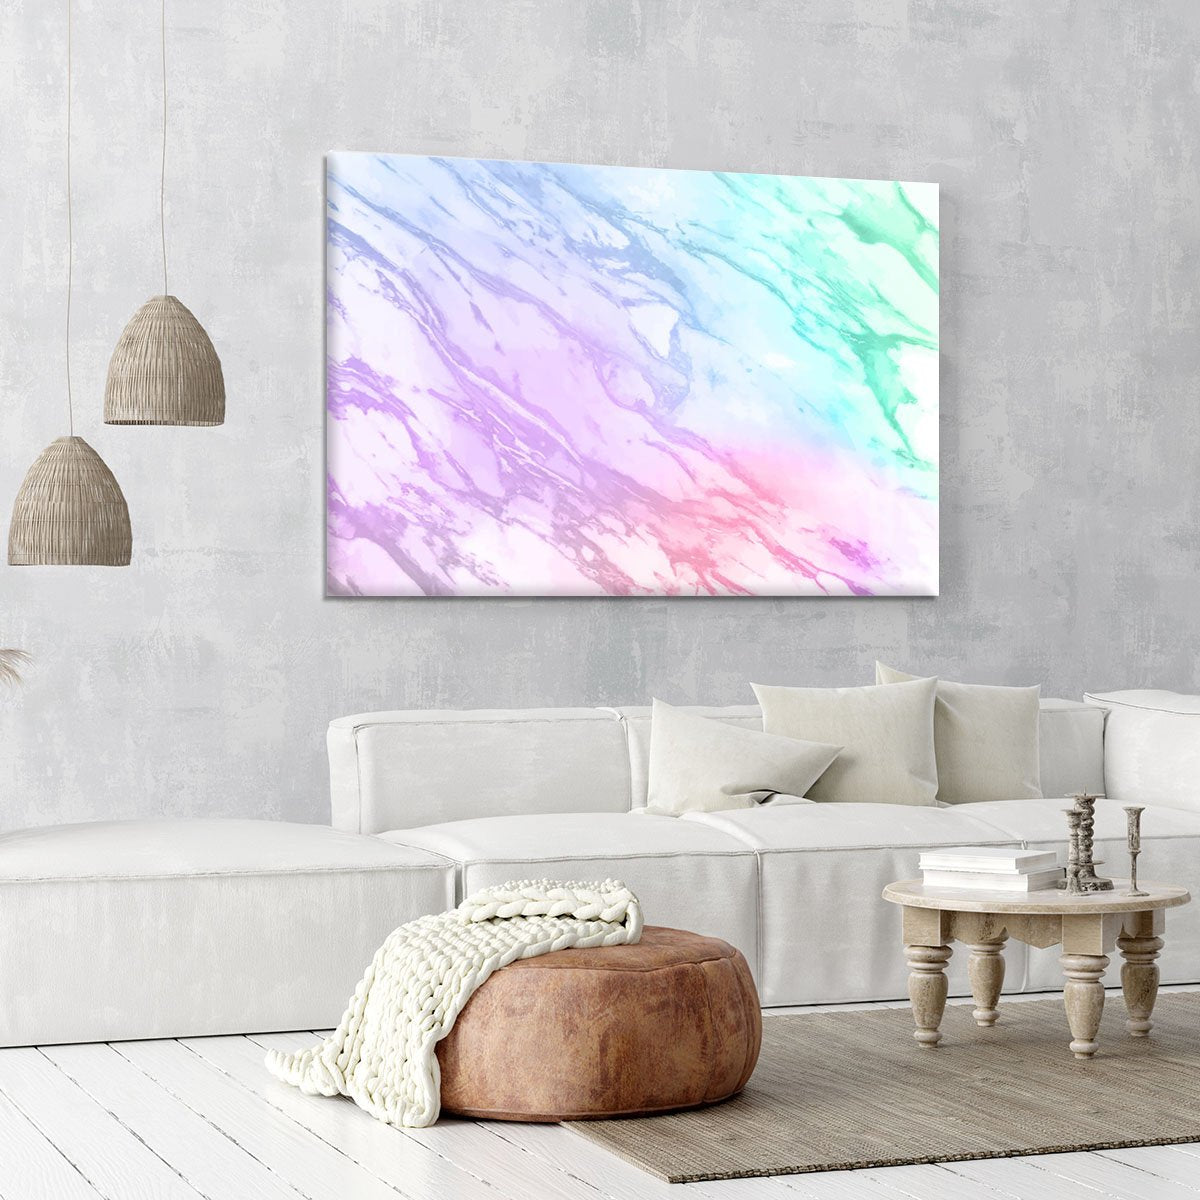 Neon Striped Marble Canvas Print or Poster